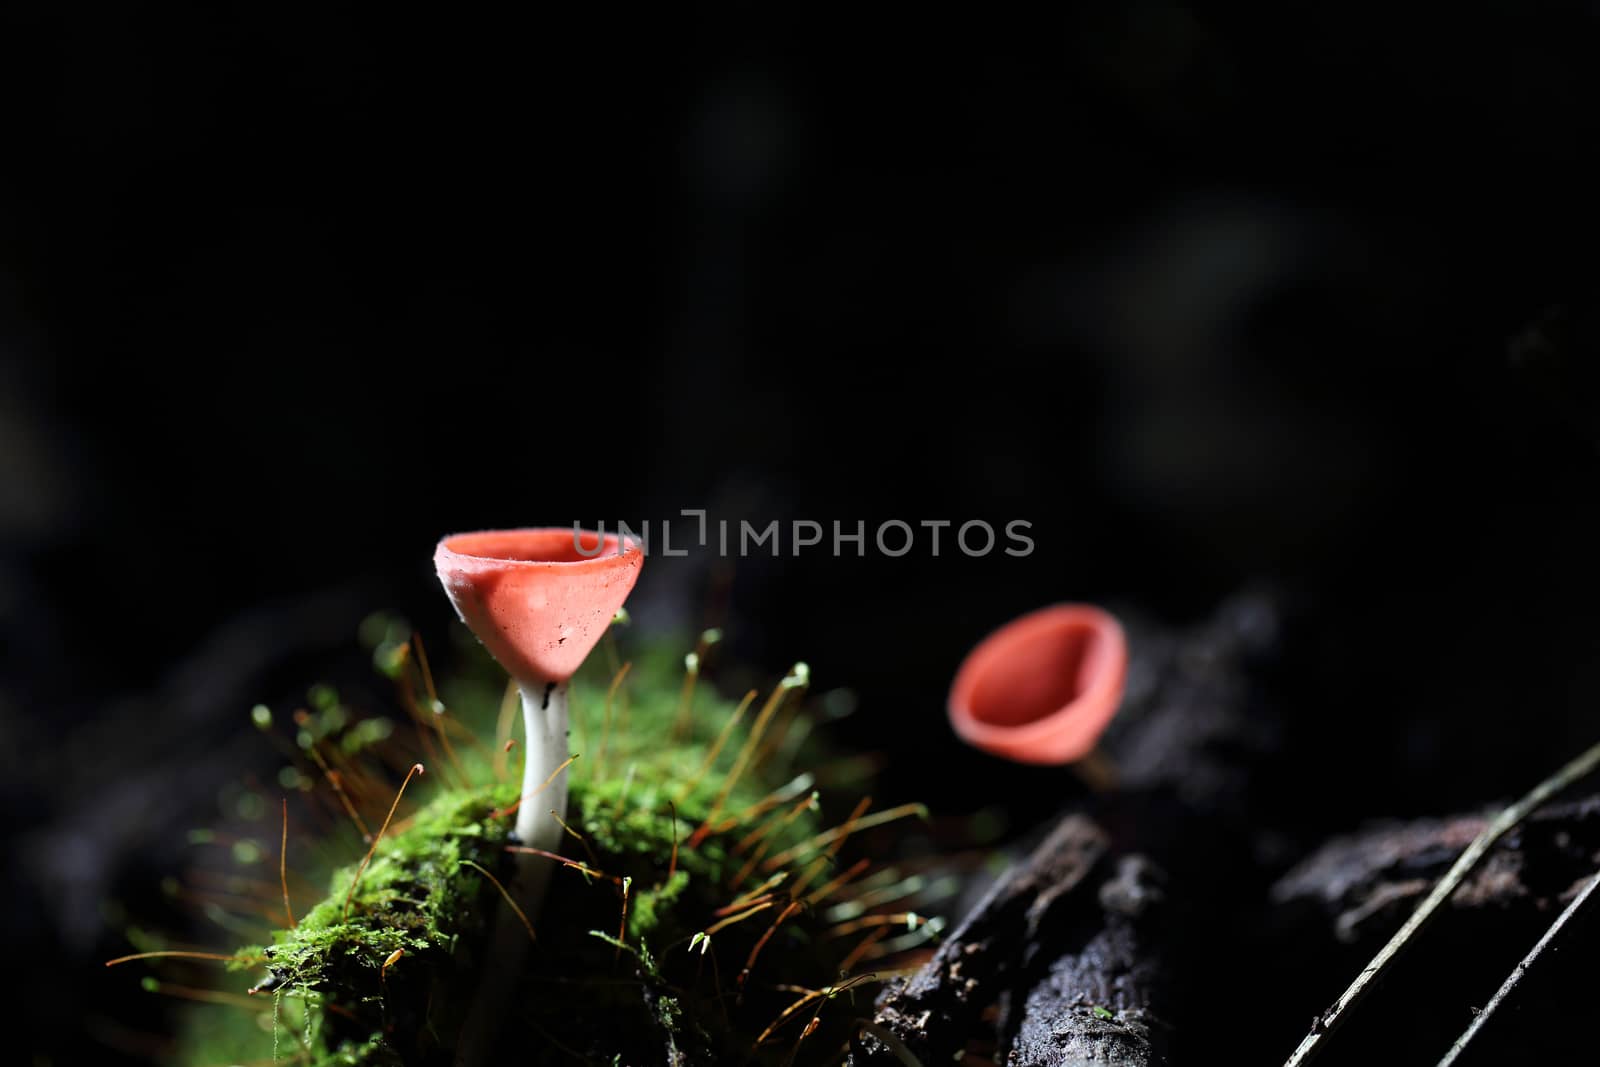 Cookeina sulcipes Fungi cup by piyato